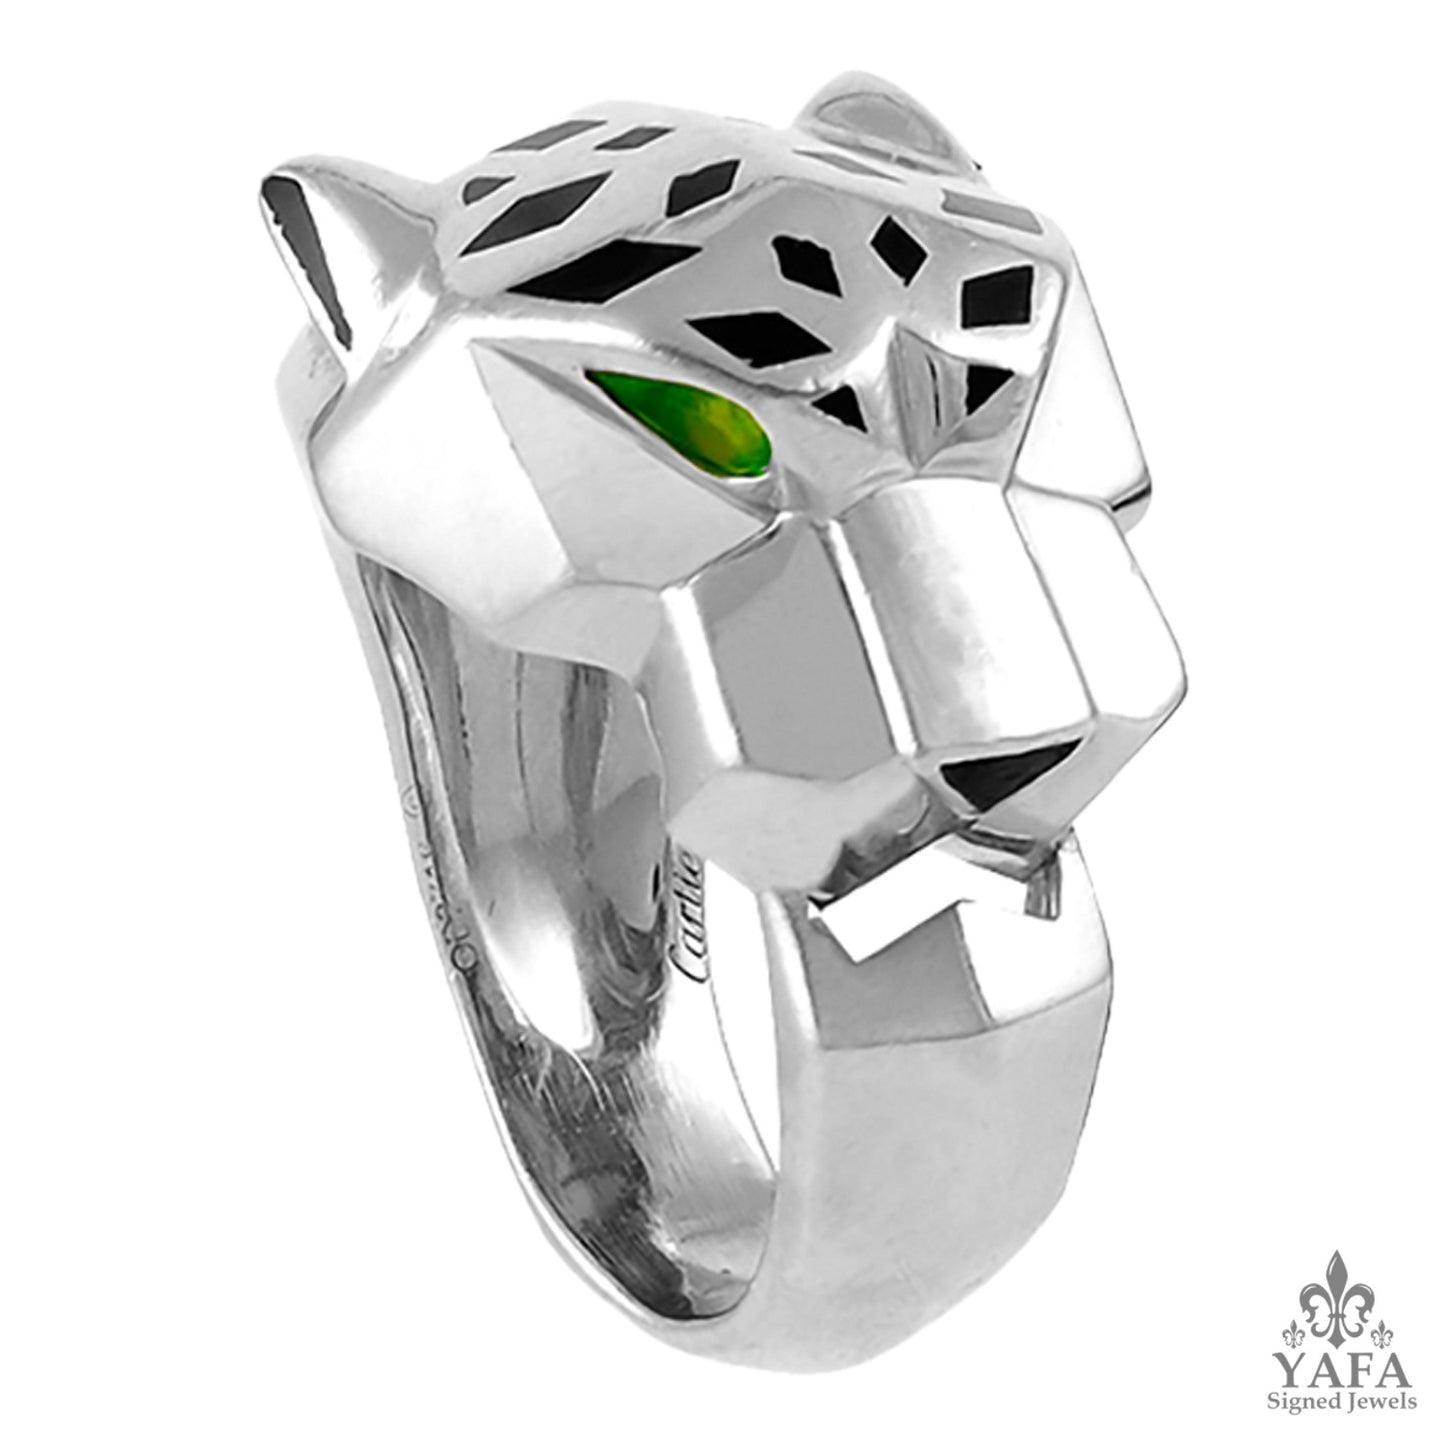 CARTIER Onyx and Tsavorite Panther Ring